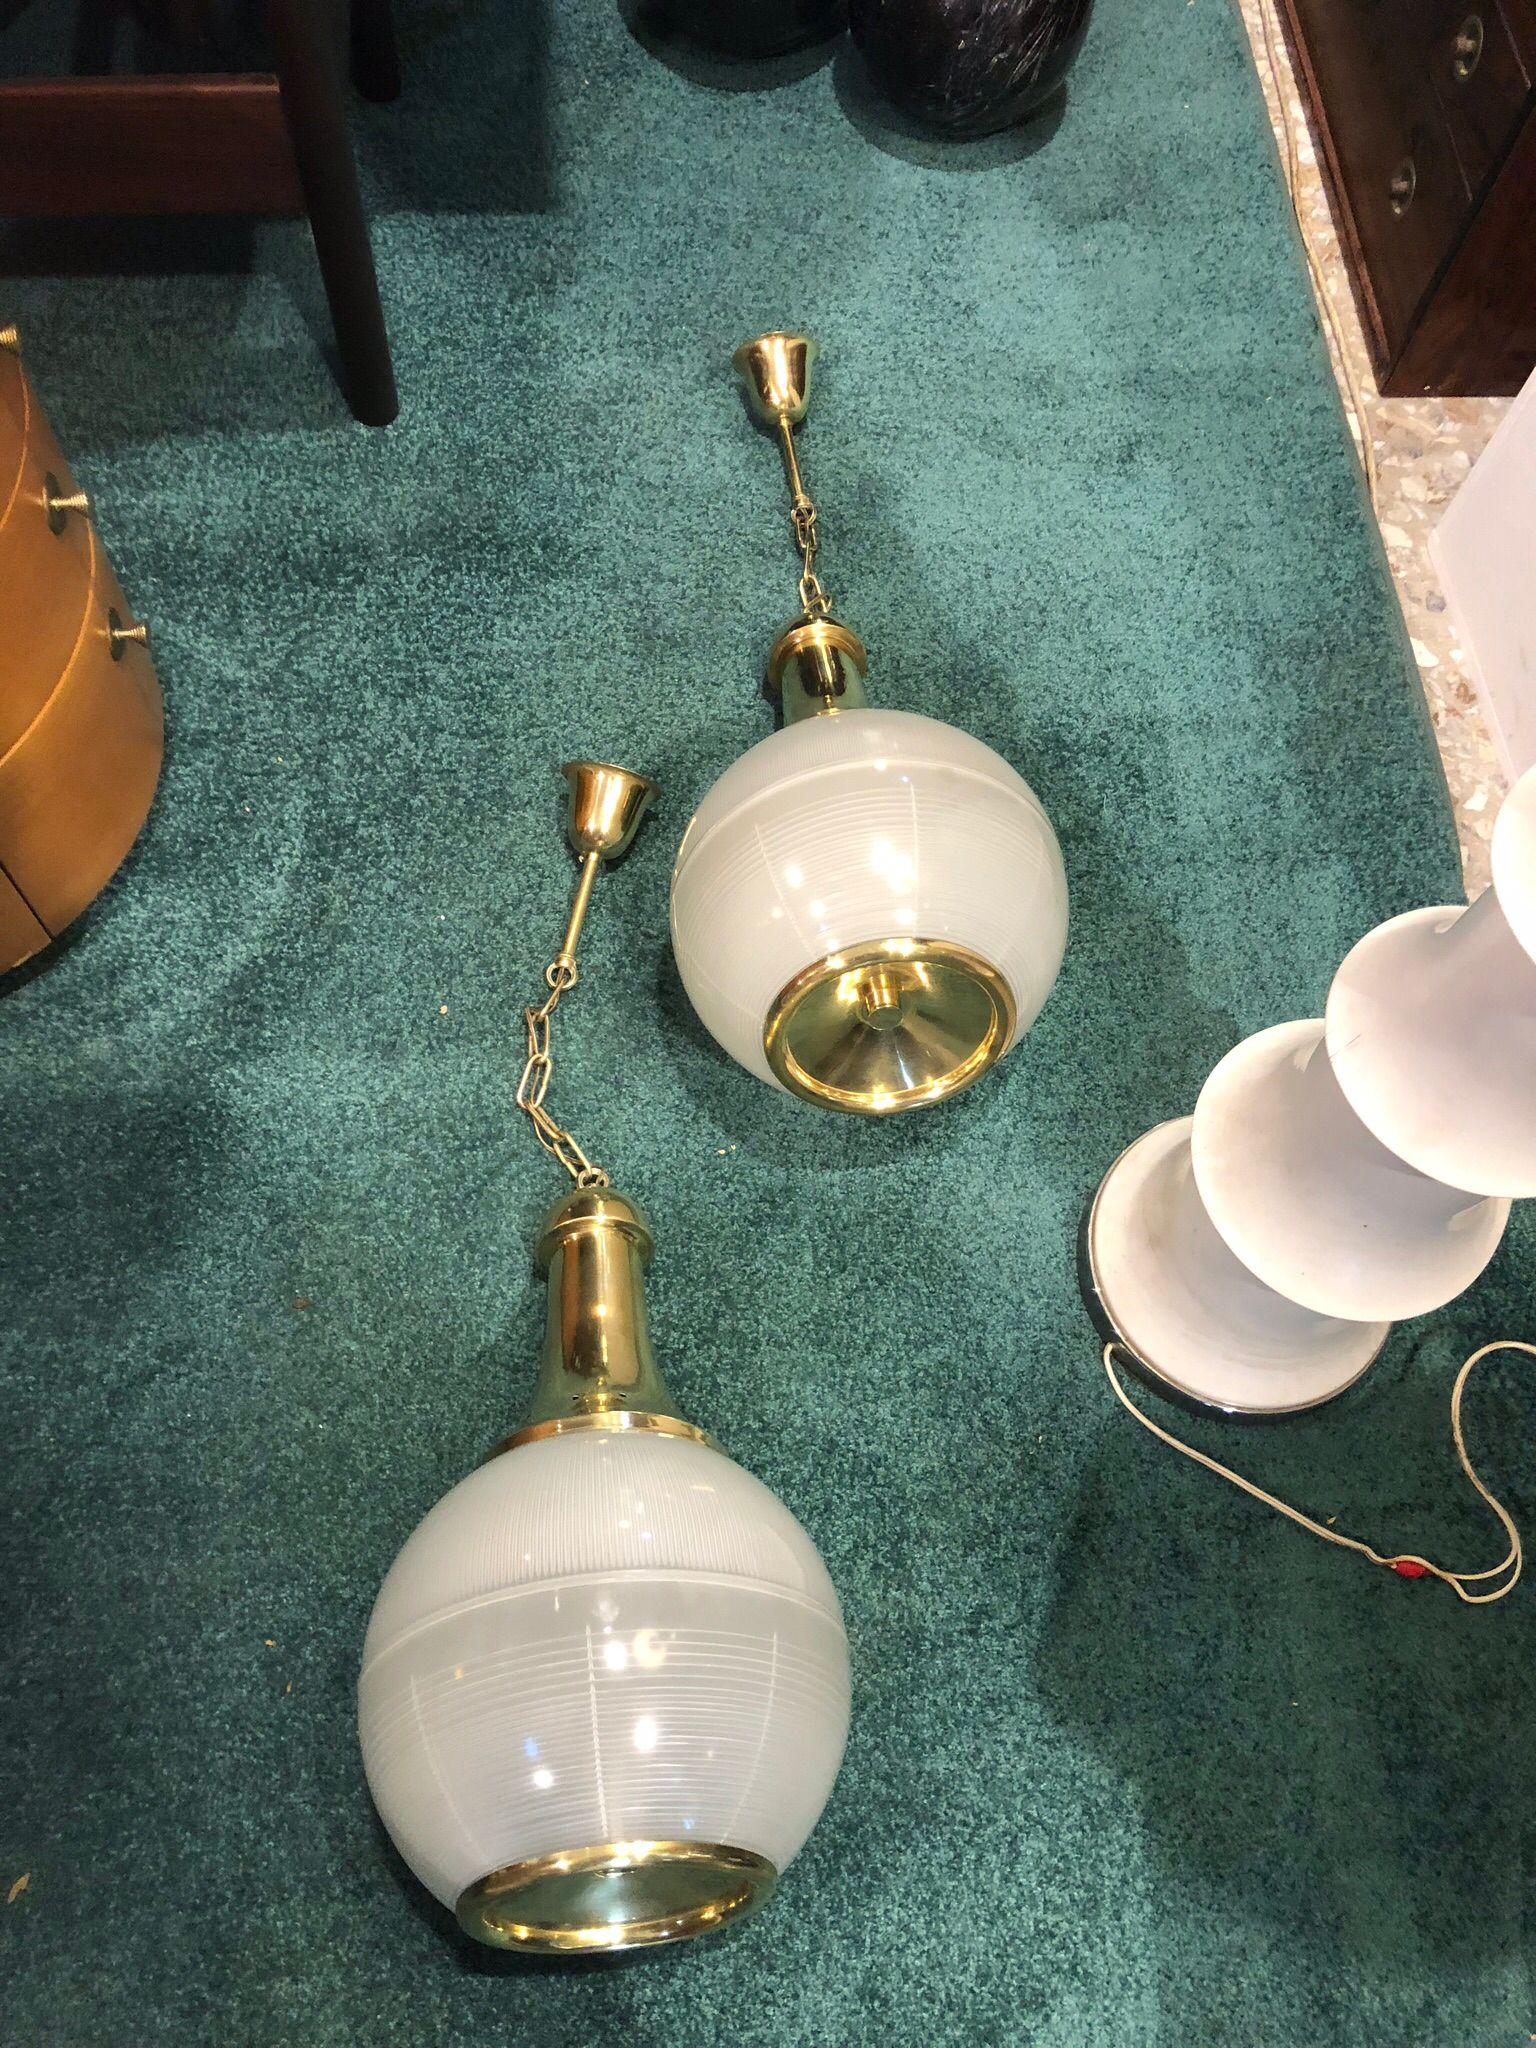 Charming Italian Mid-Century-Modern, Pair of pendant lamps designed by Luigi Caccia Dominioni for the Azucena fashion house in the 1950s.
Model, made of satin blown glass and structure in polished brass. Excellent conditions. Dimensions of the